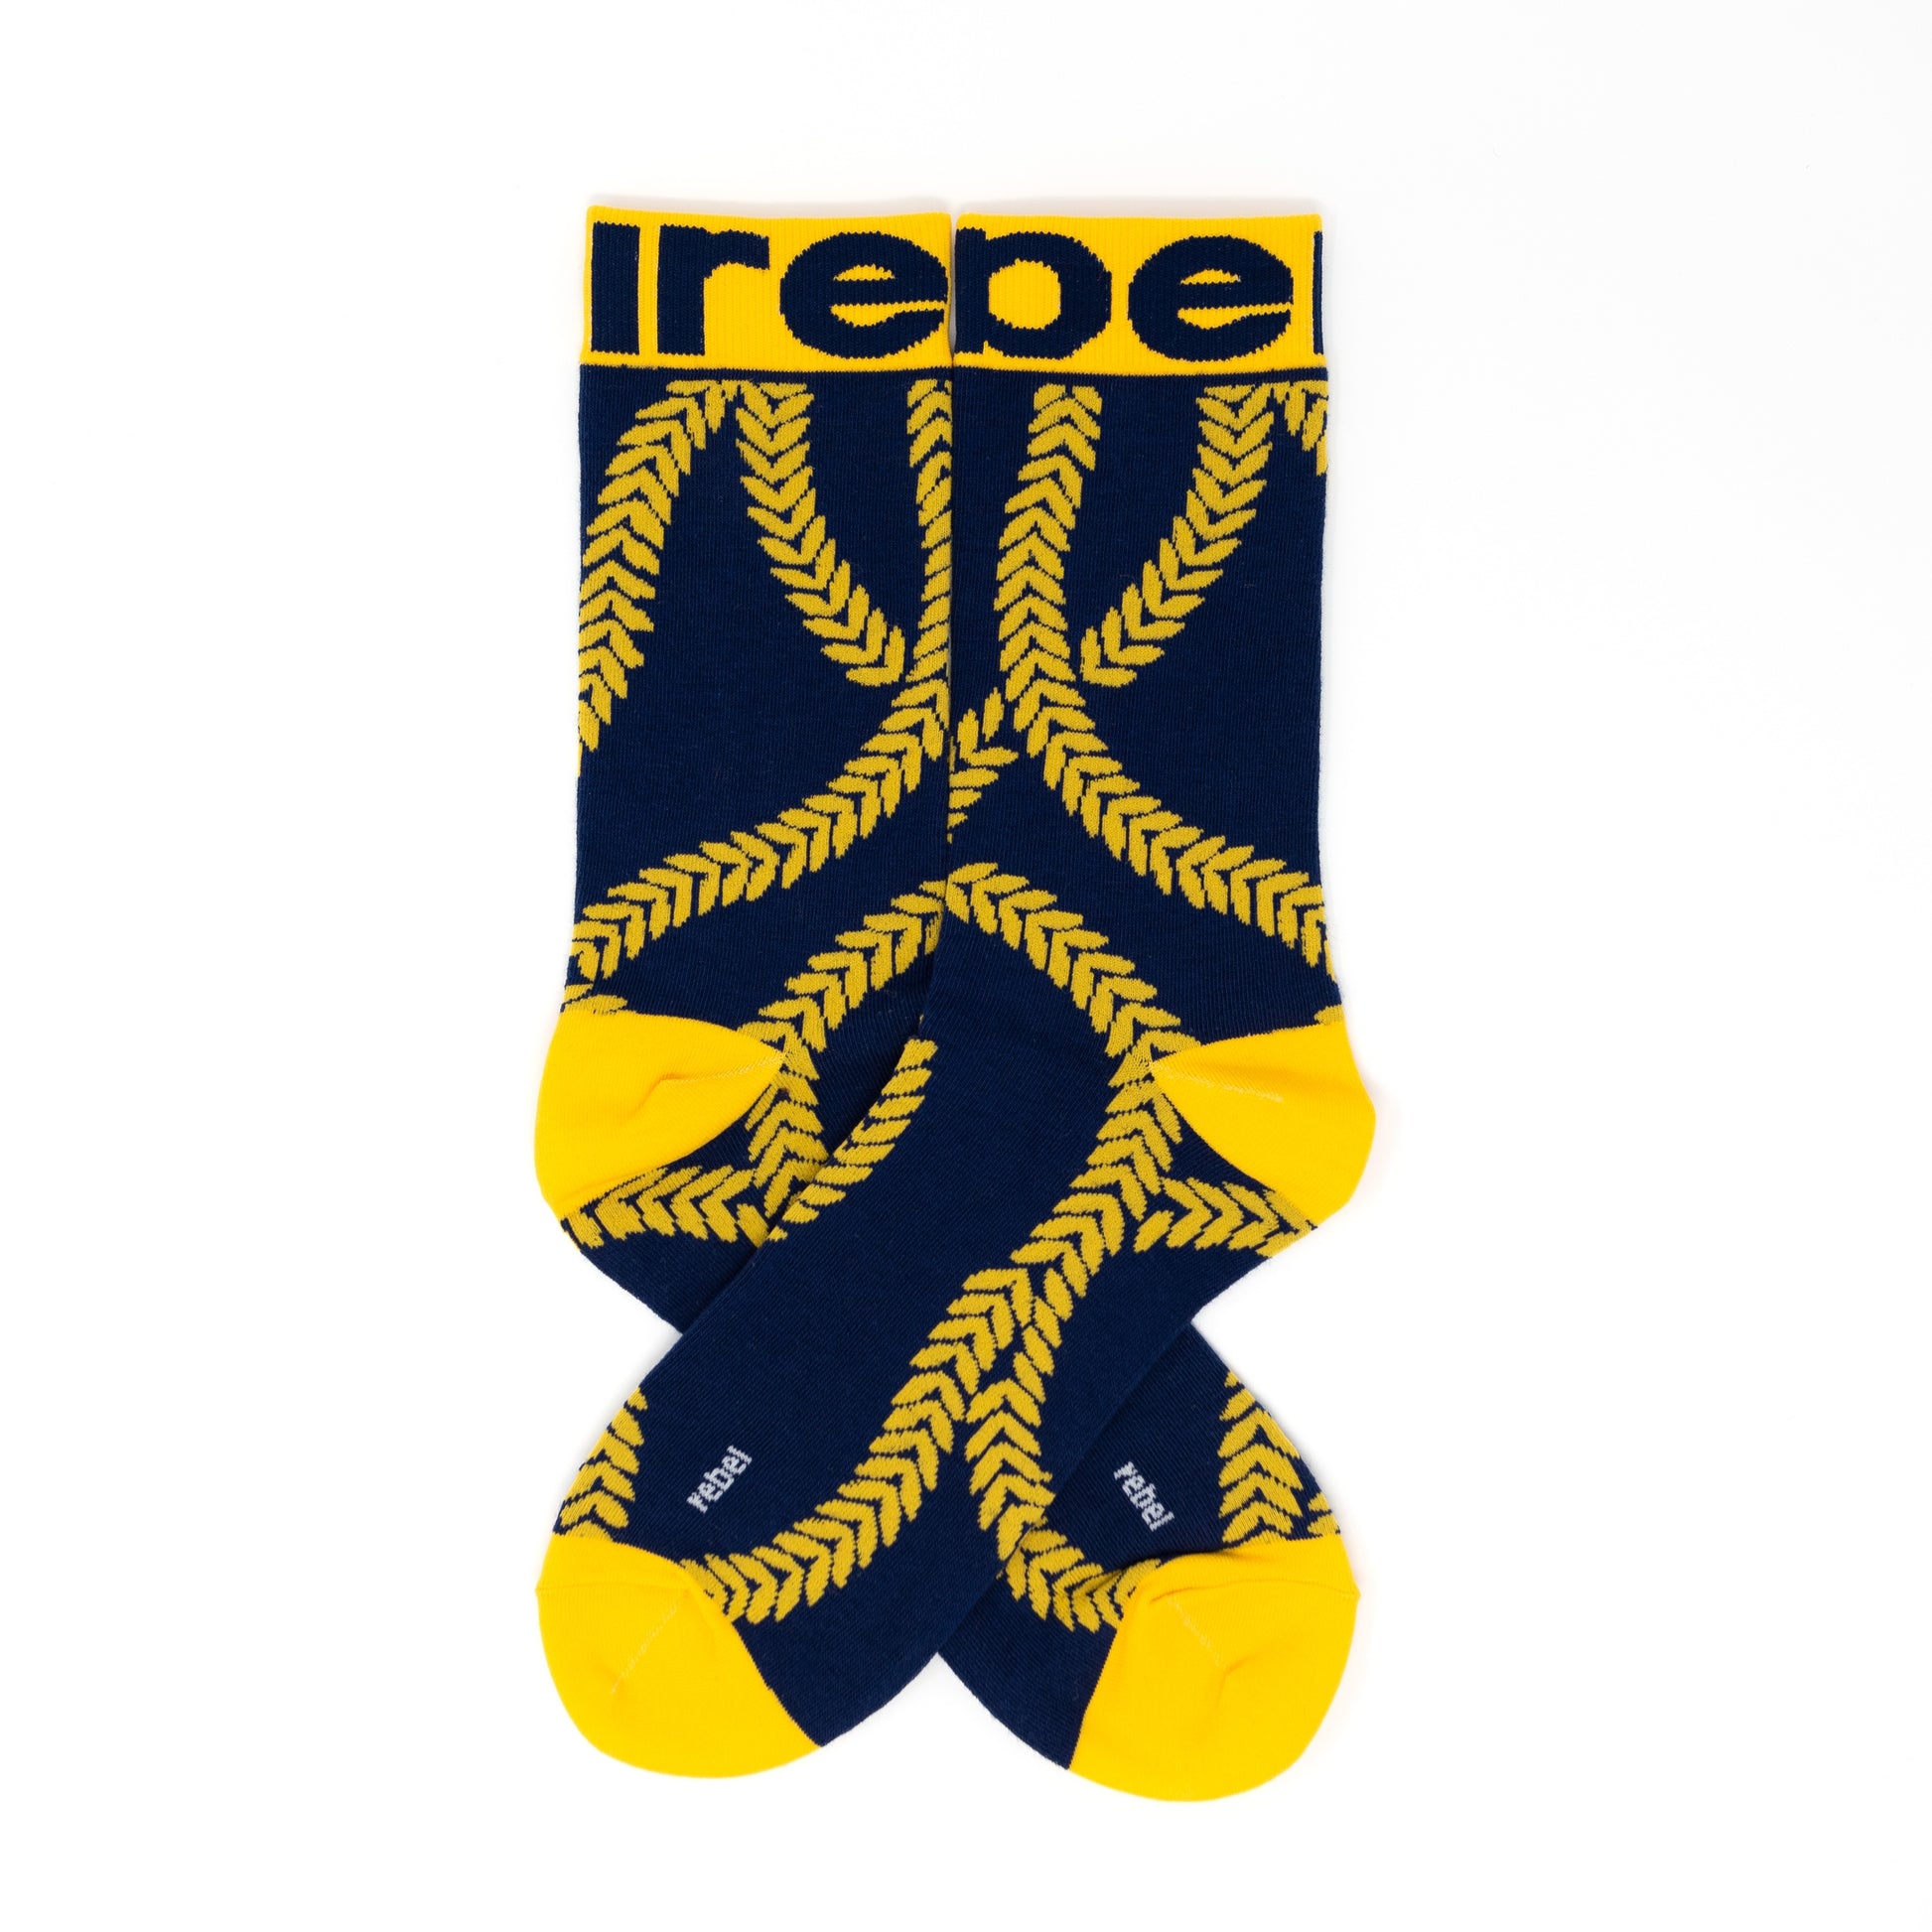 Crafted from a high-quality blend of cotton, nylon, and spandex, our funky socks are both comfortable and durable.